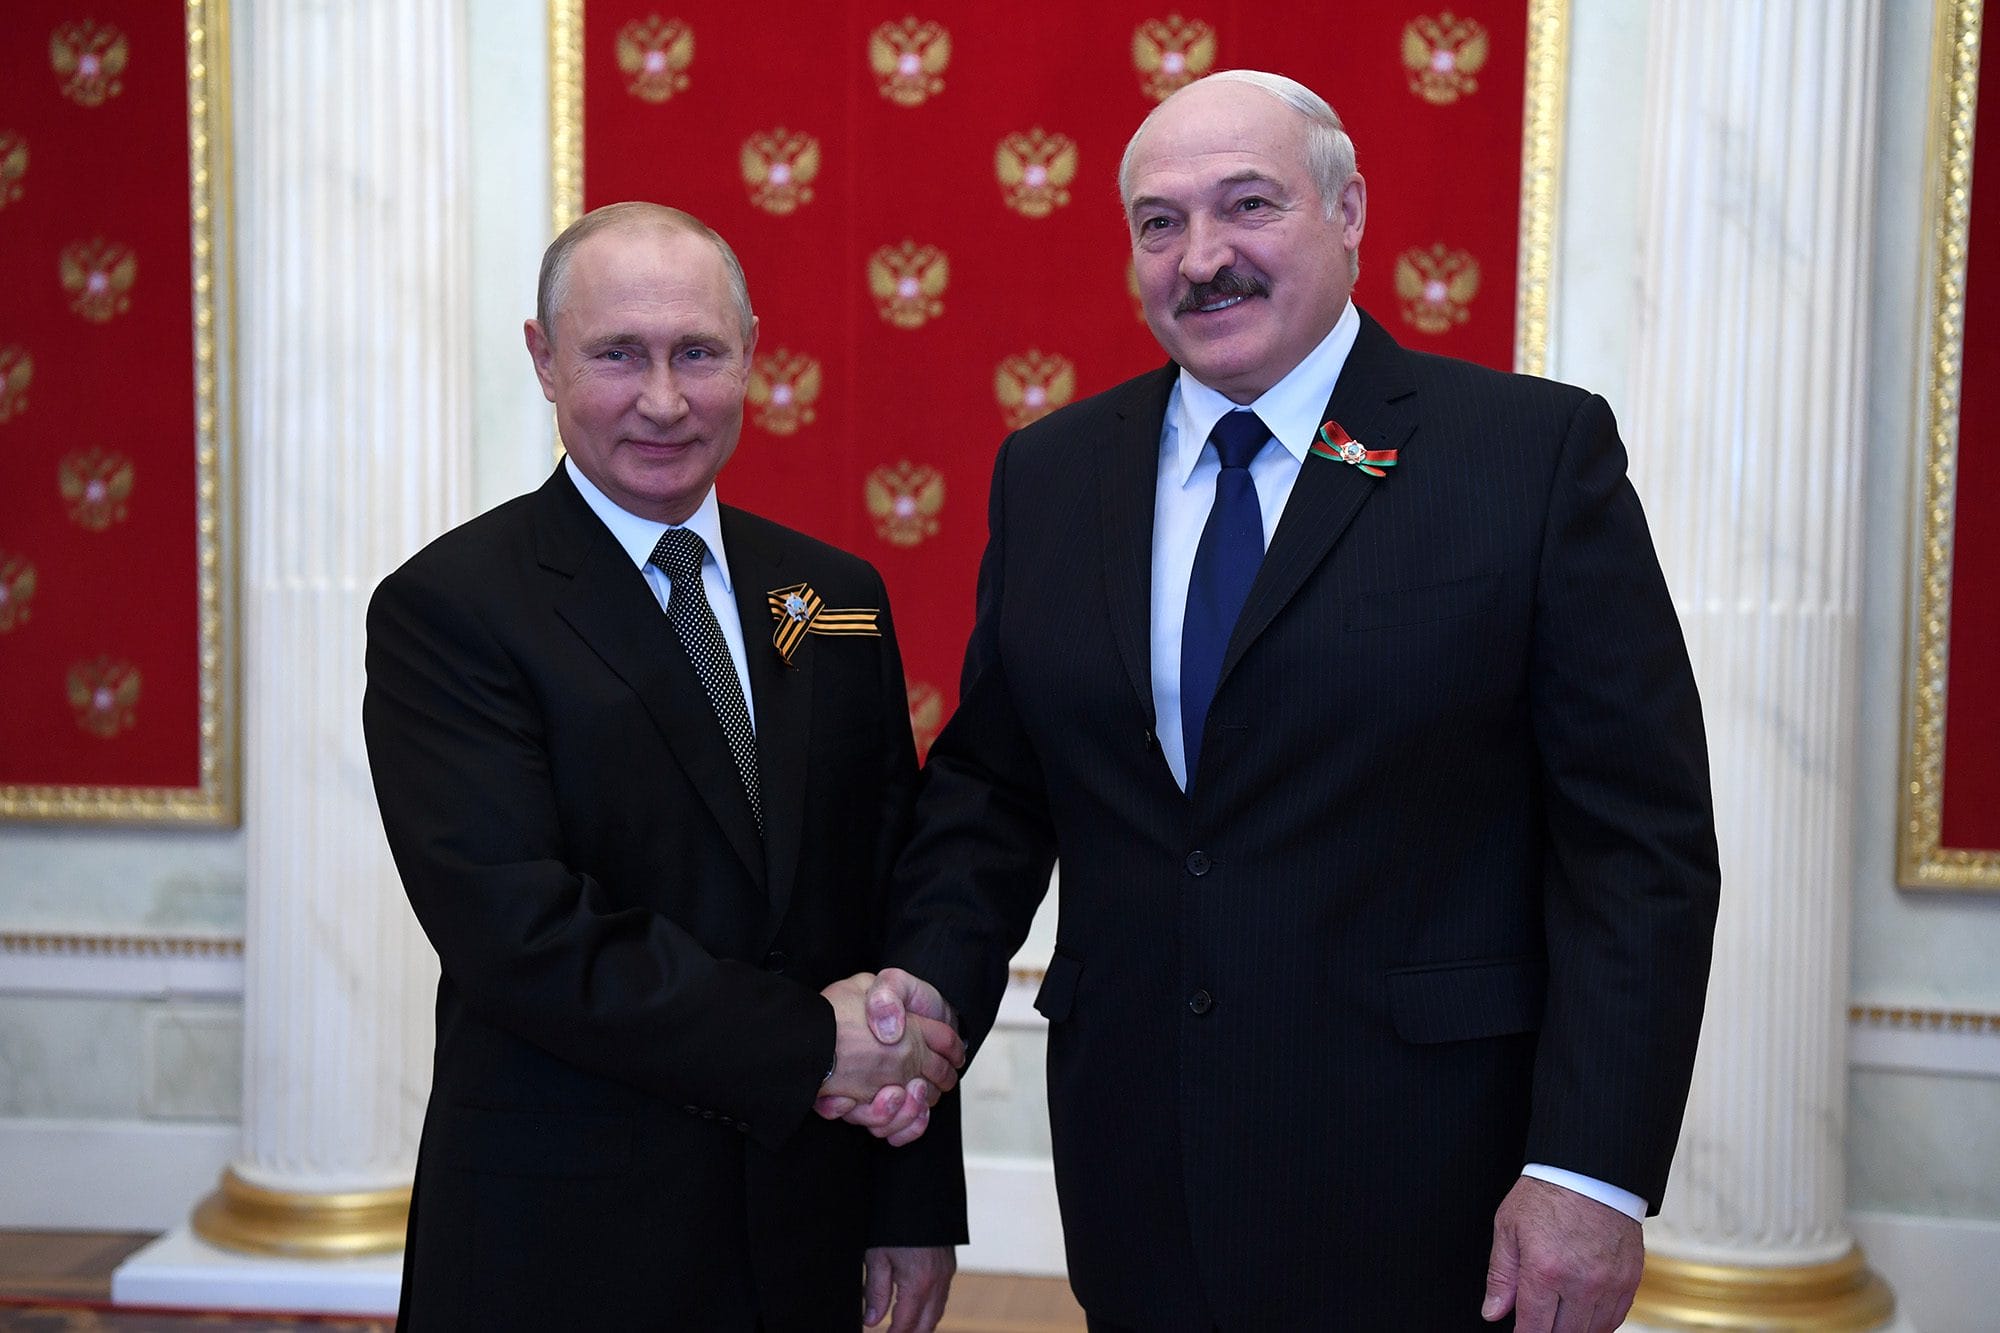 Russian President Vladimir Putin (left) and Belarusian President Alexander Lukashenko shake hands while posing for a photo during a ceremony in the Kremlin, Moscow, Russia on June 24, 2020.